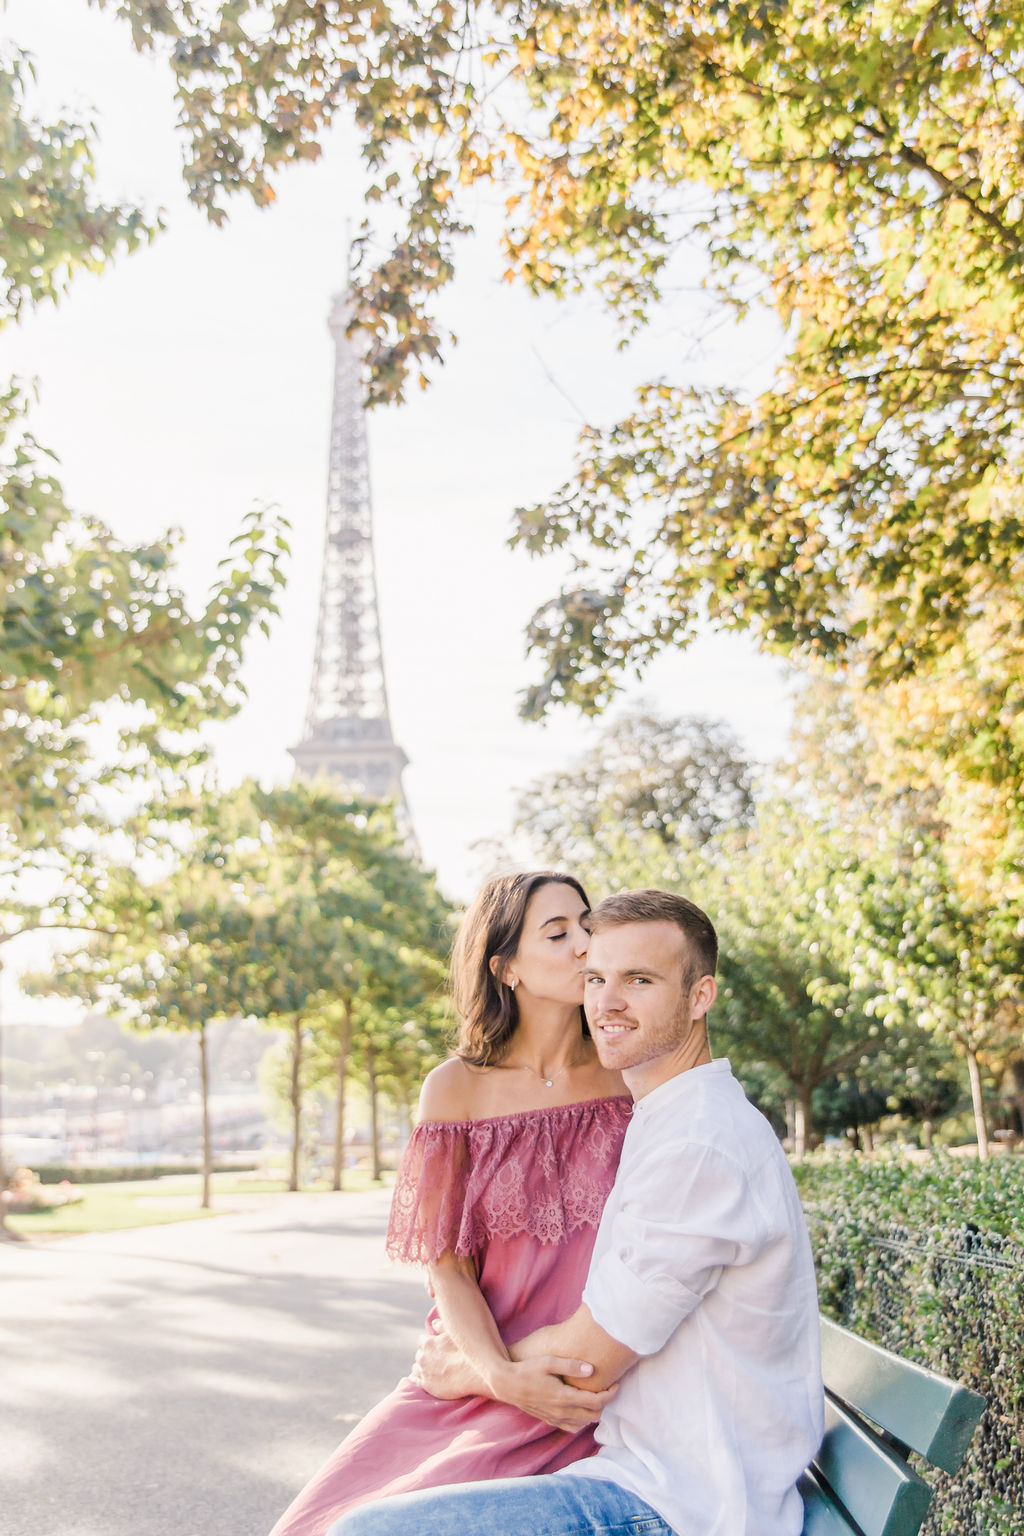 Engagement Photos in Paris' Trocadero With a Stunning View of Eiffel Tower by Celine on OneThreeOneFour 19